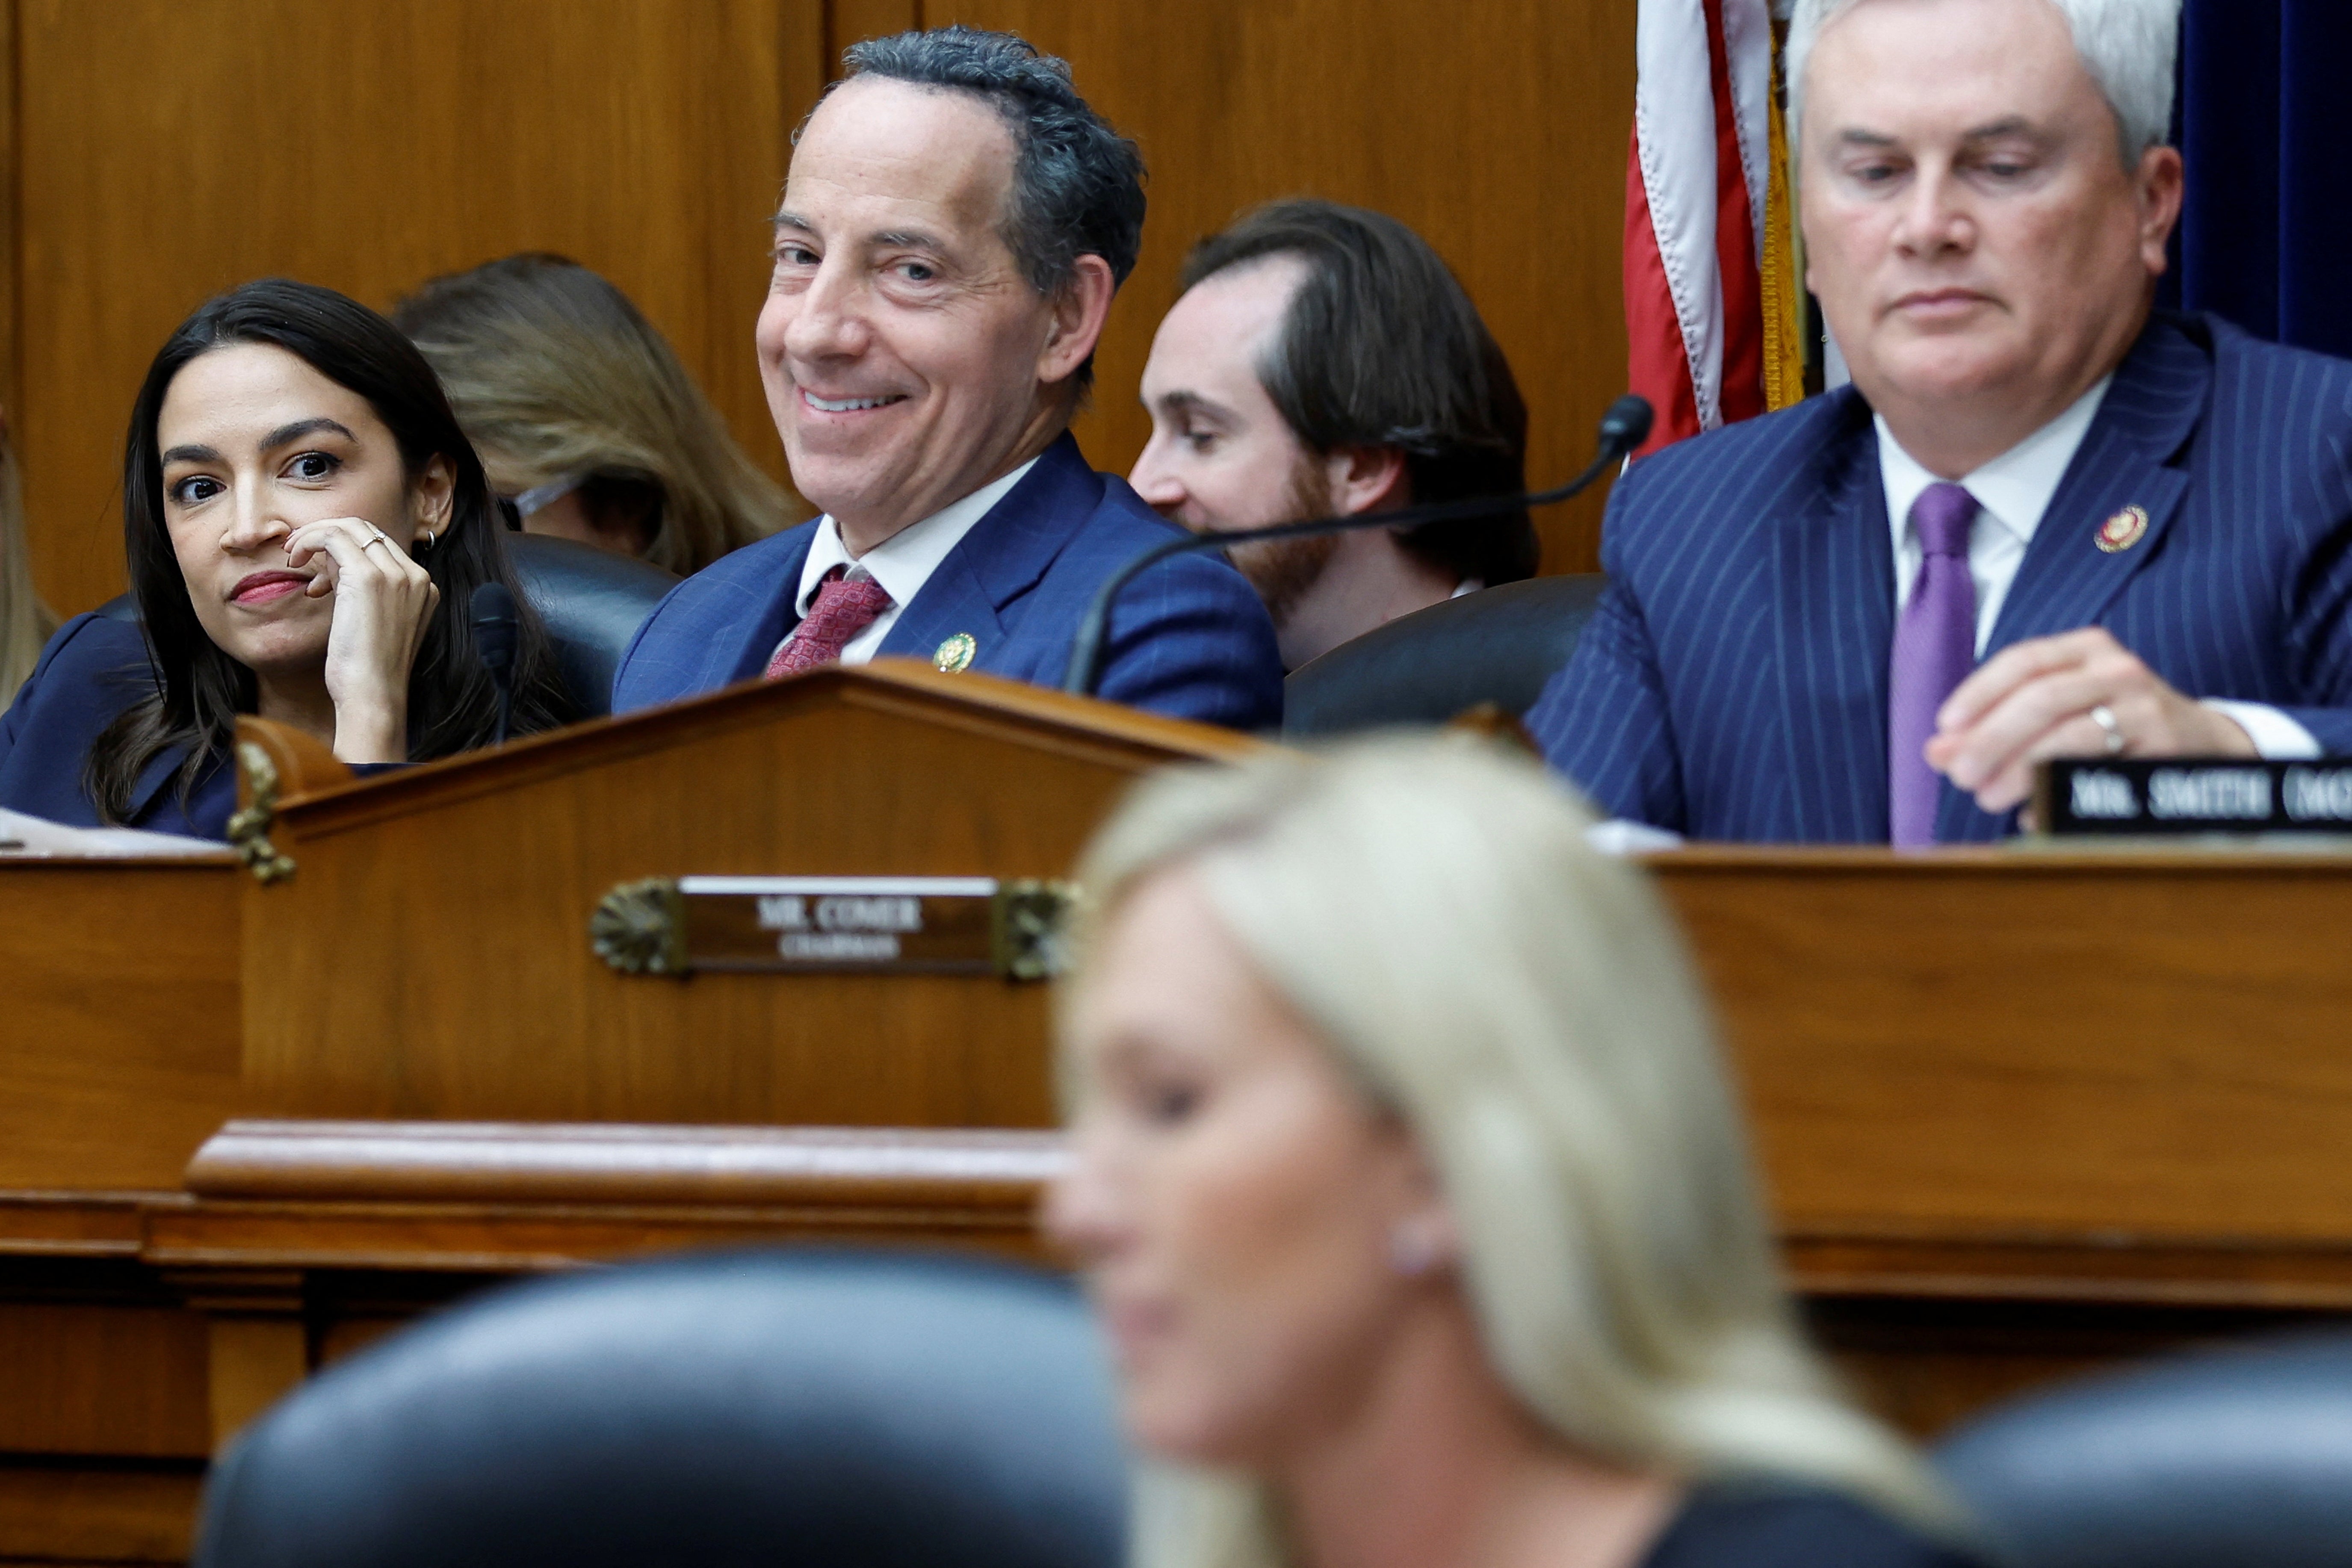 Democrats Alexandria Ocasio-Cortez, left, and Jamie Raskin, second left, look on as Republicans James Comer and Marjorie Taylor Greene take part in their first impeachment hearing against President Biden